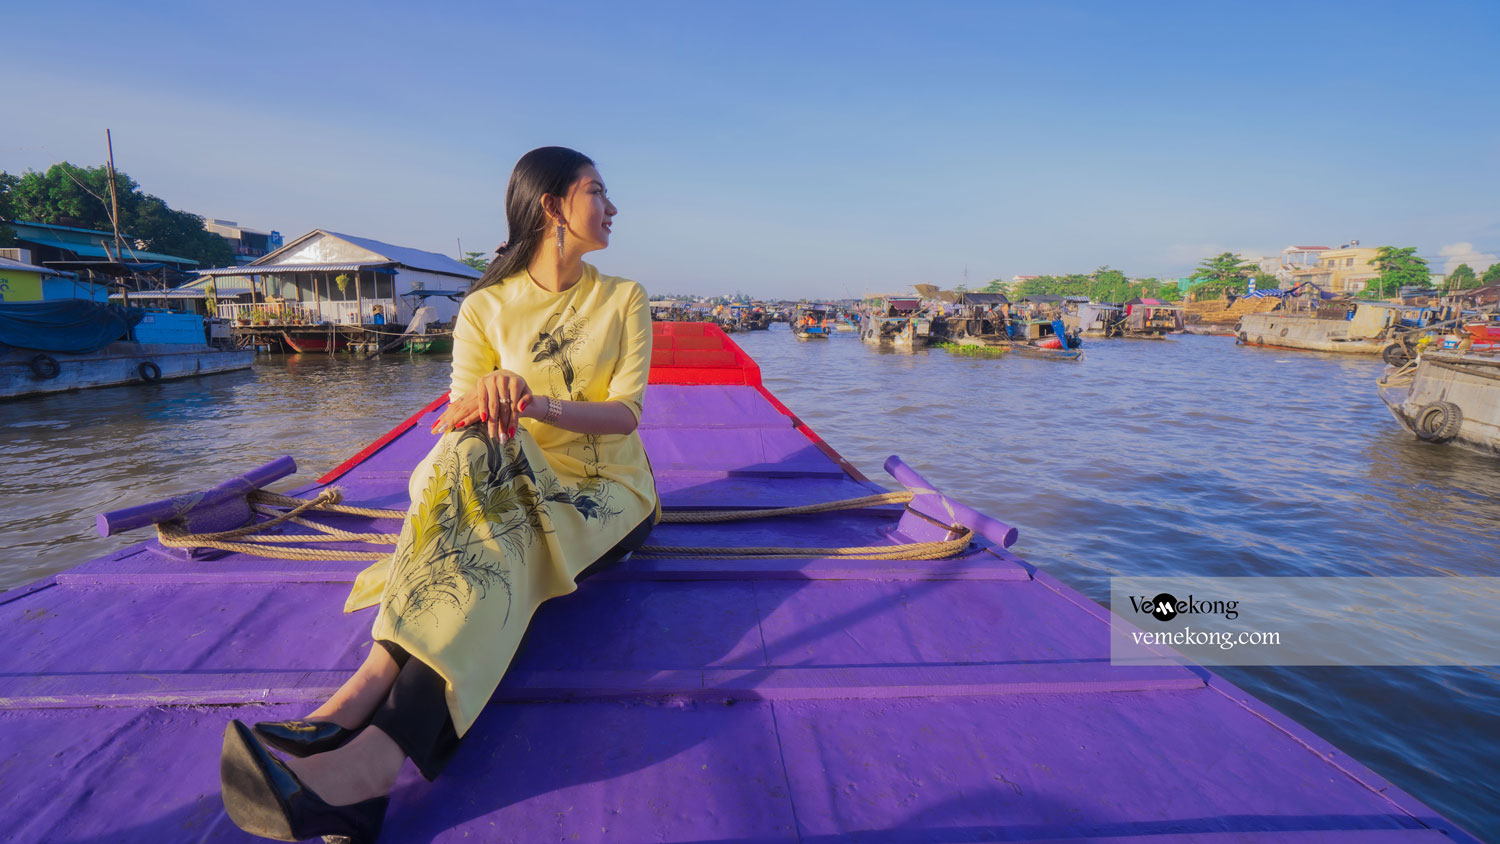 Cai Rang floating market in March with Can Tho Purple Boat